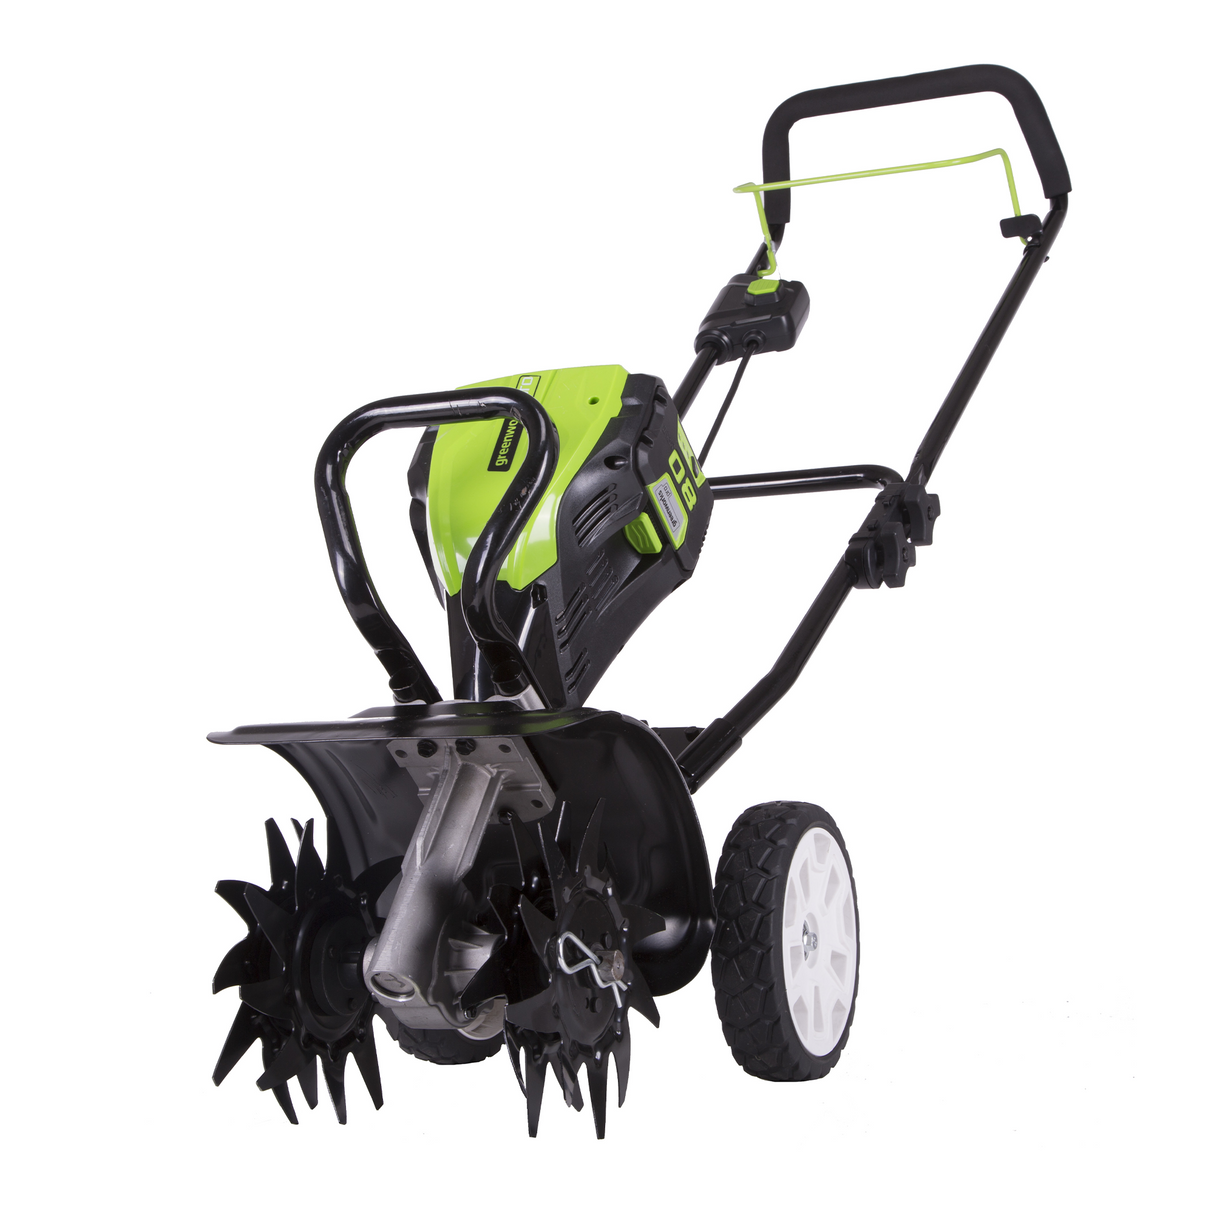 80V 10" Cultivator, 2.0Ah Battery and Charger Included